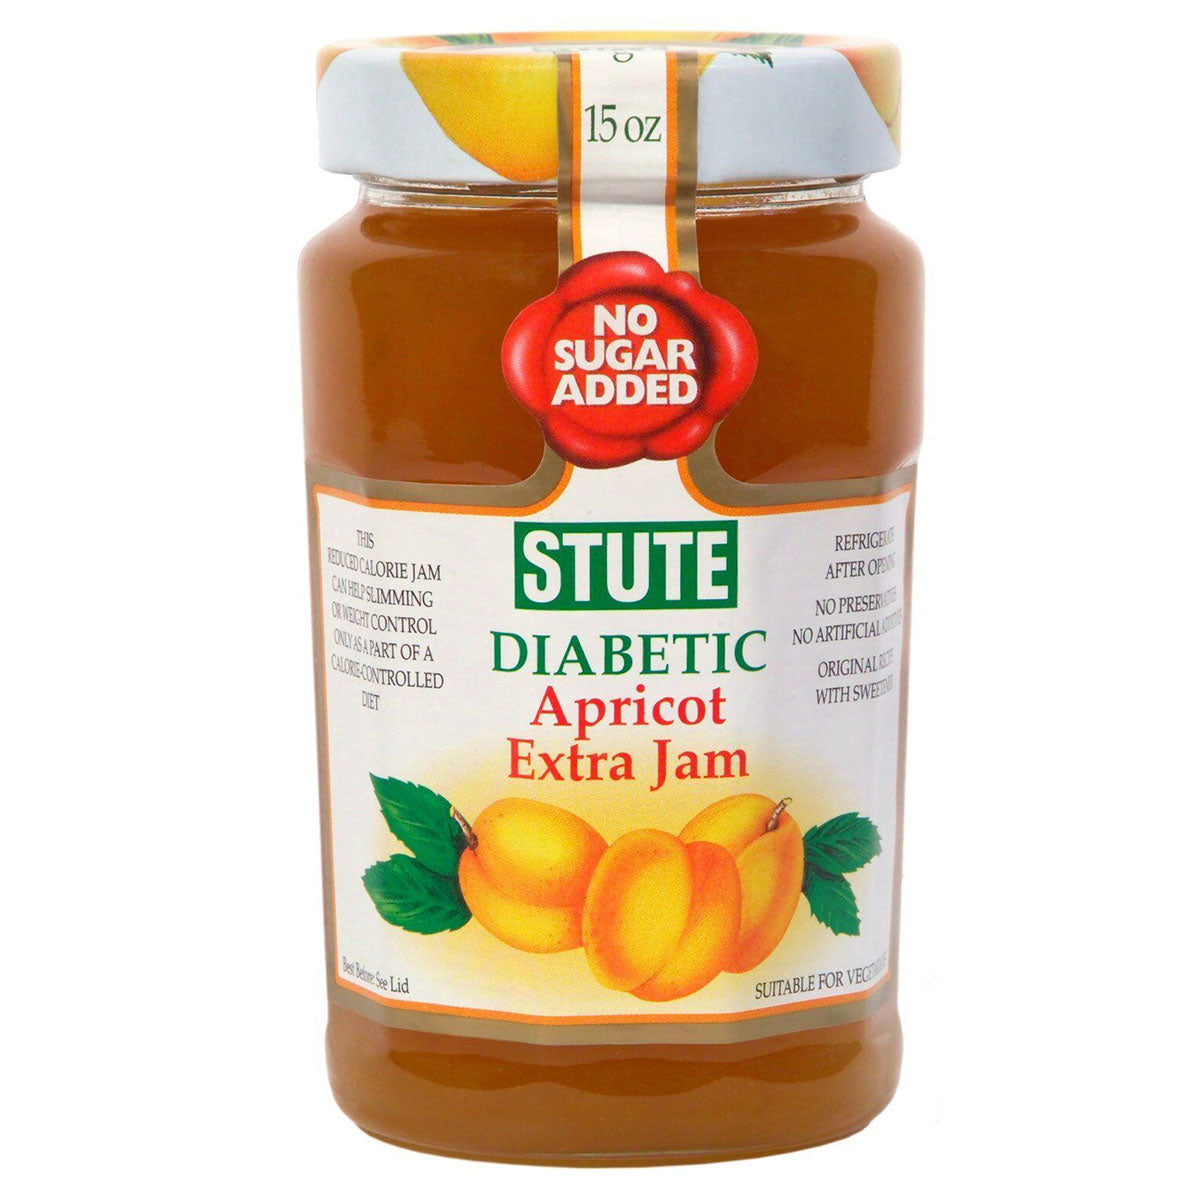 Stute - Diabetic Apricot Extra Jam - 430g - Continental Food Store